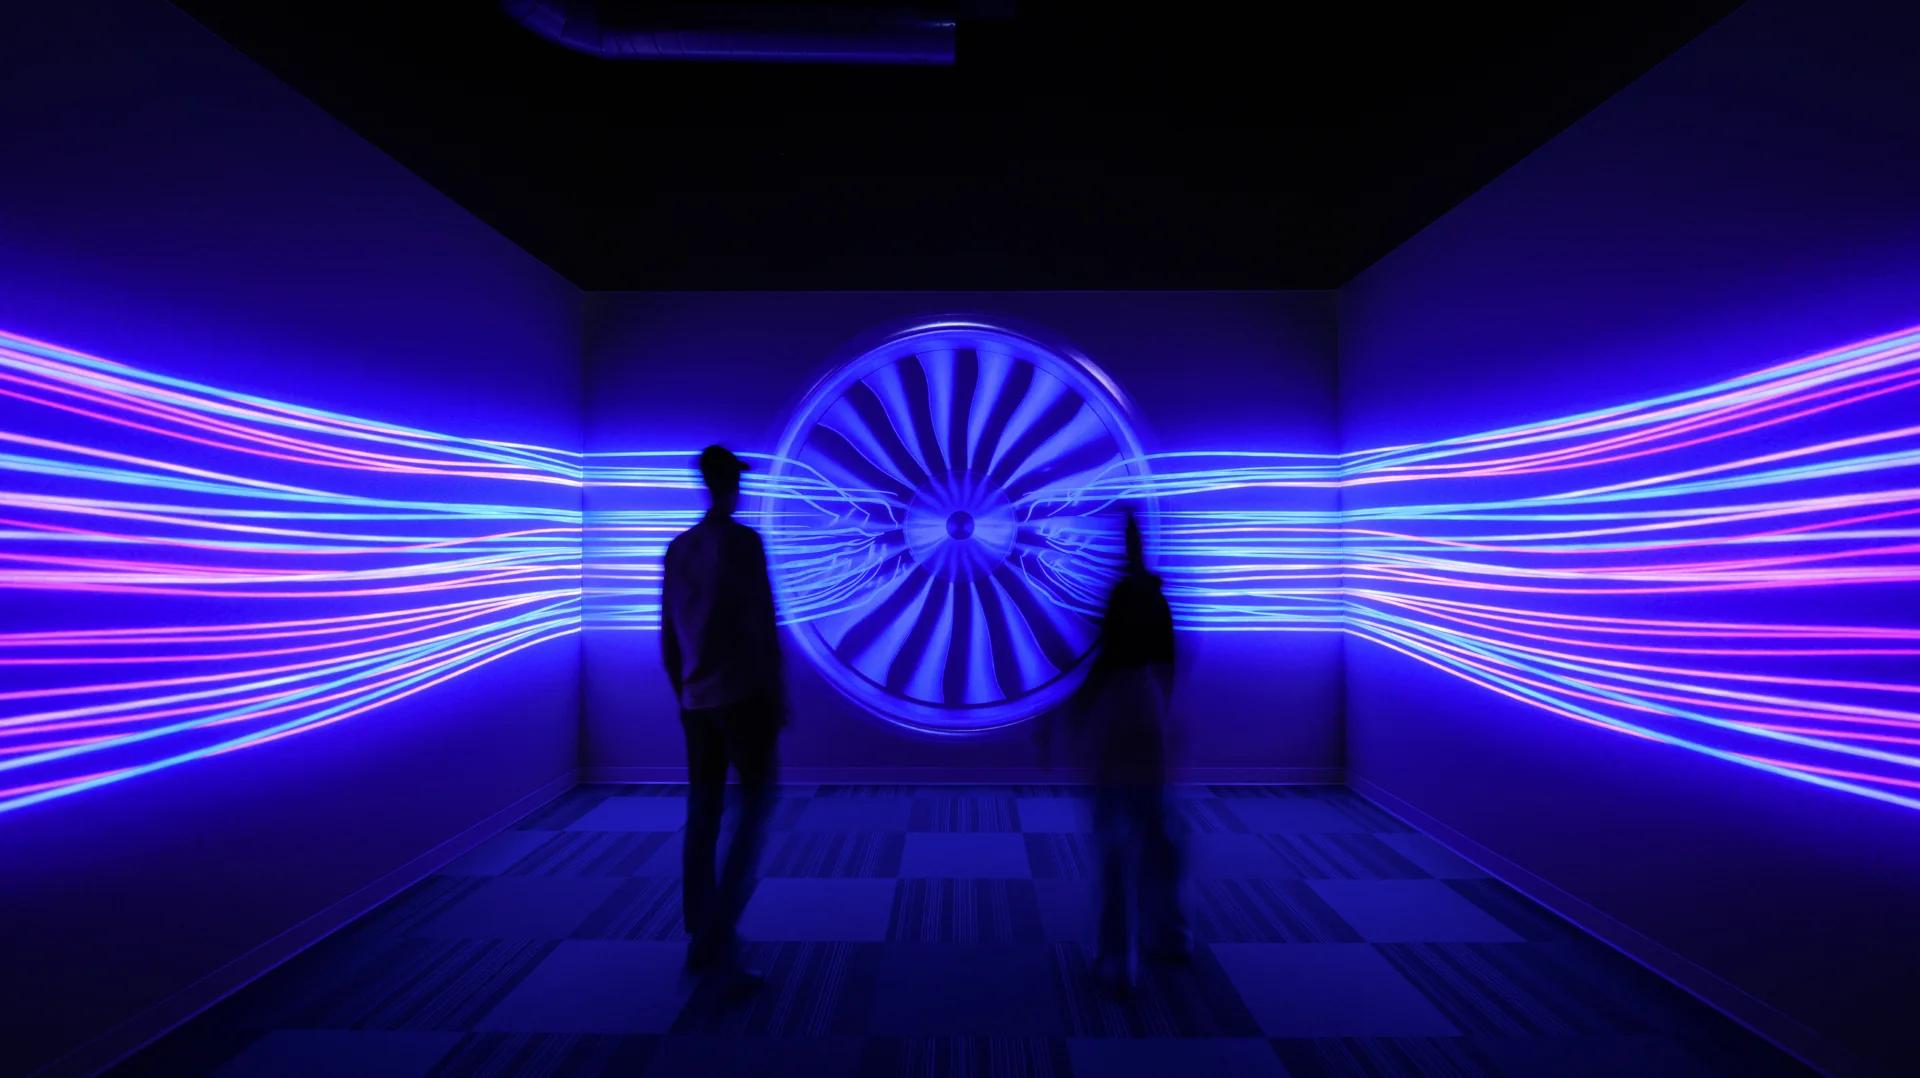 two people standing in the center of a small room with a glowing blue image of an airplane engine covering all three walls